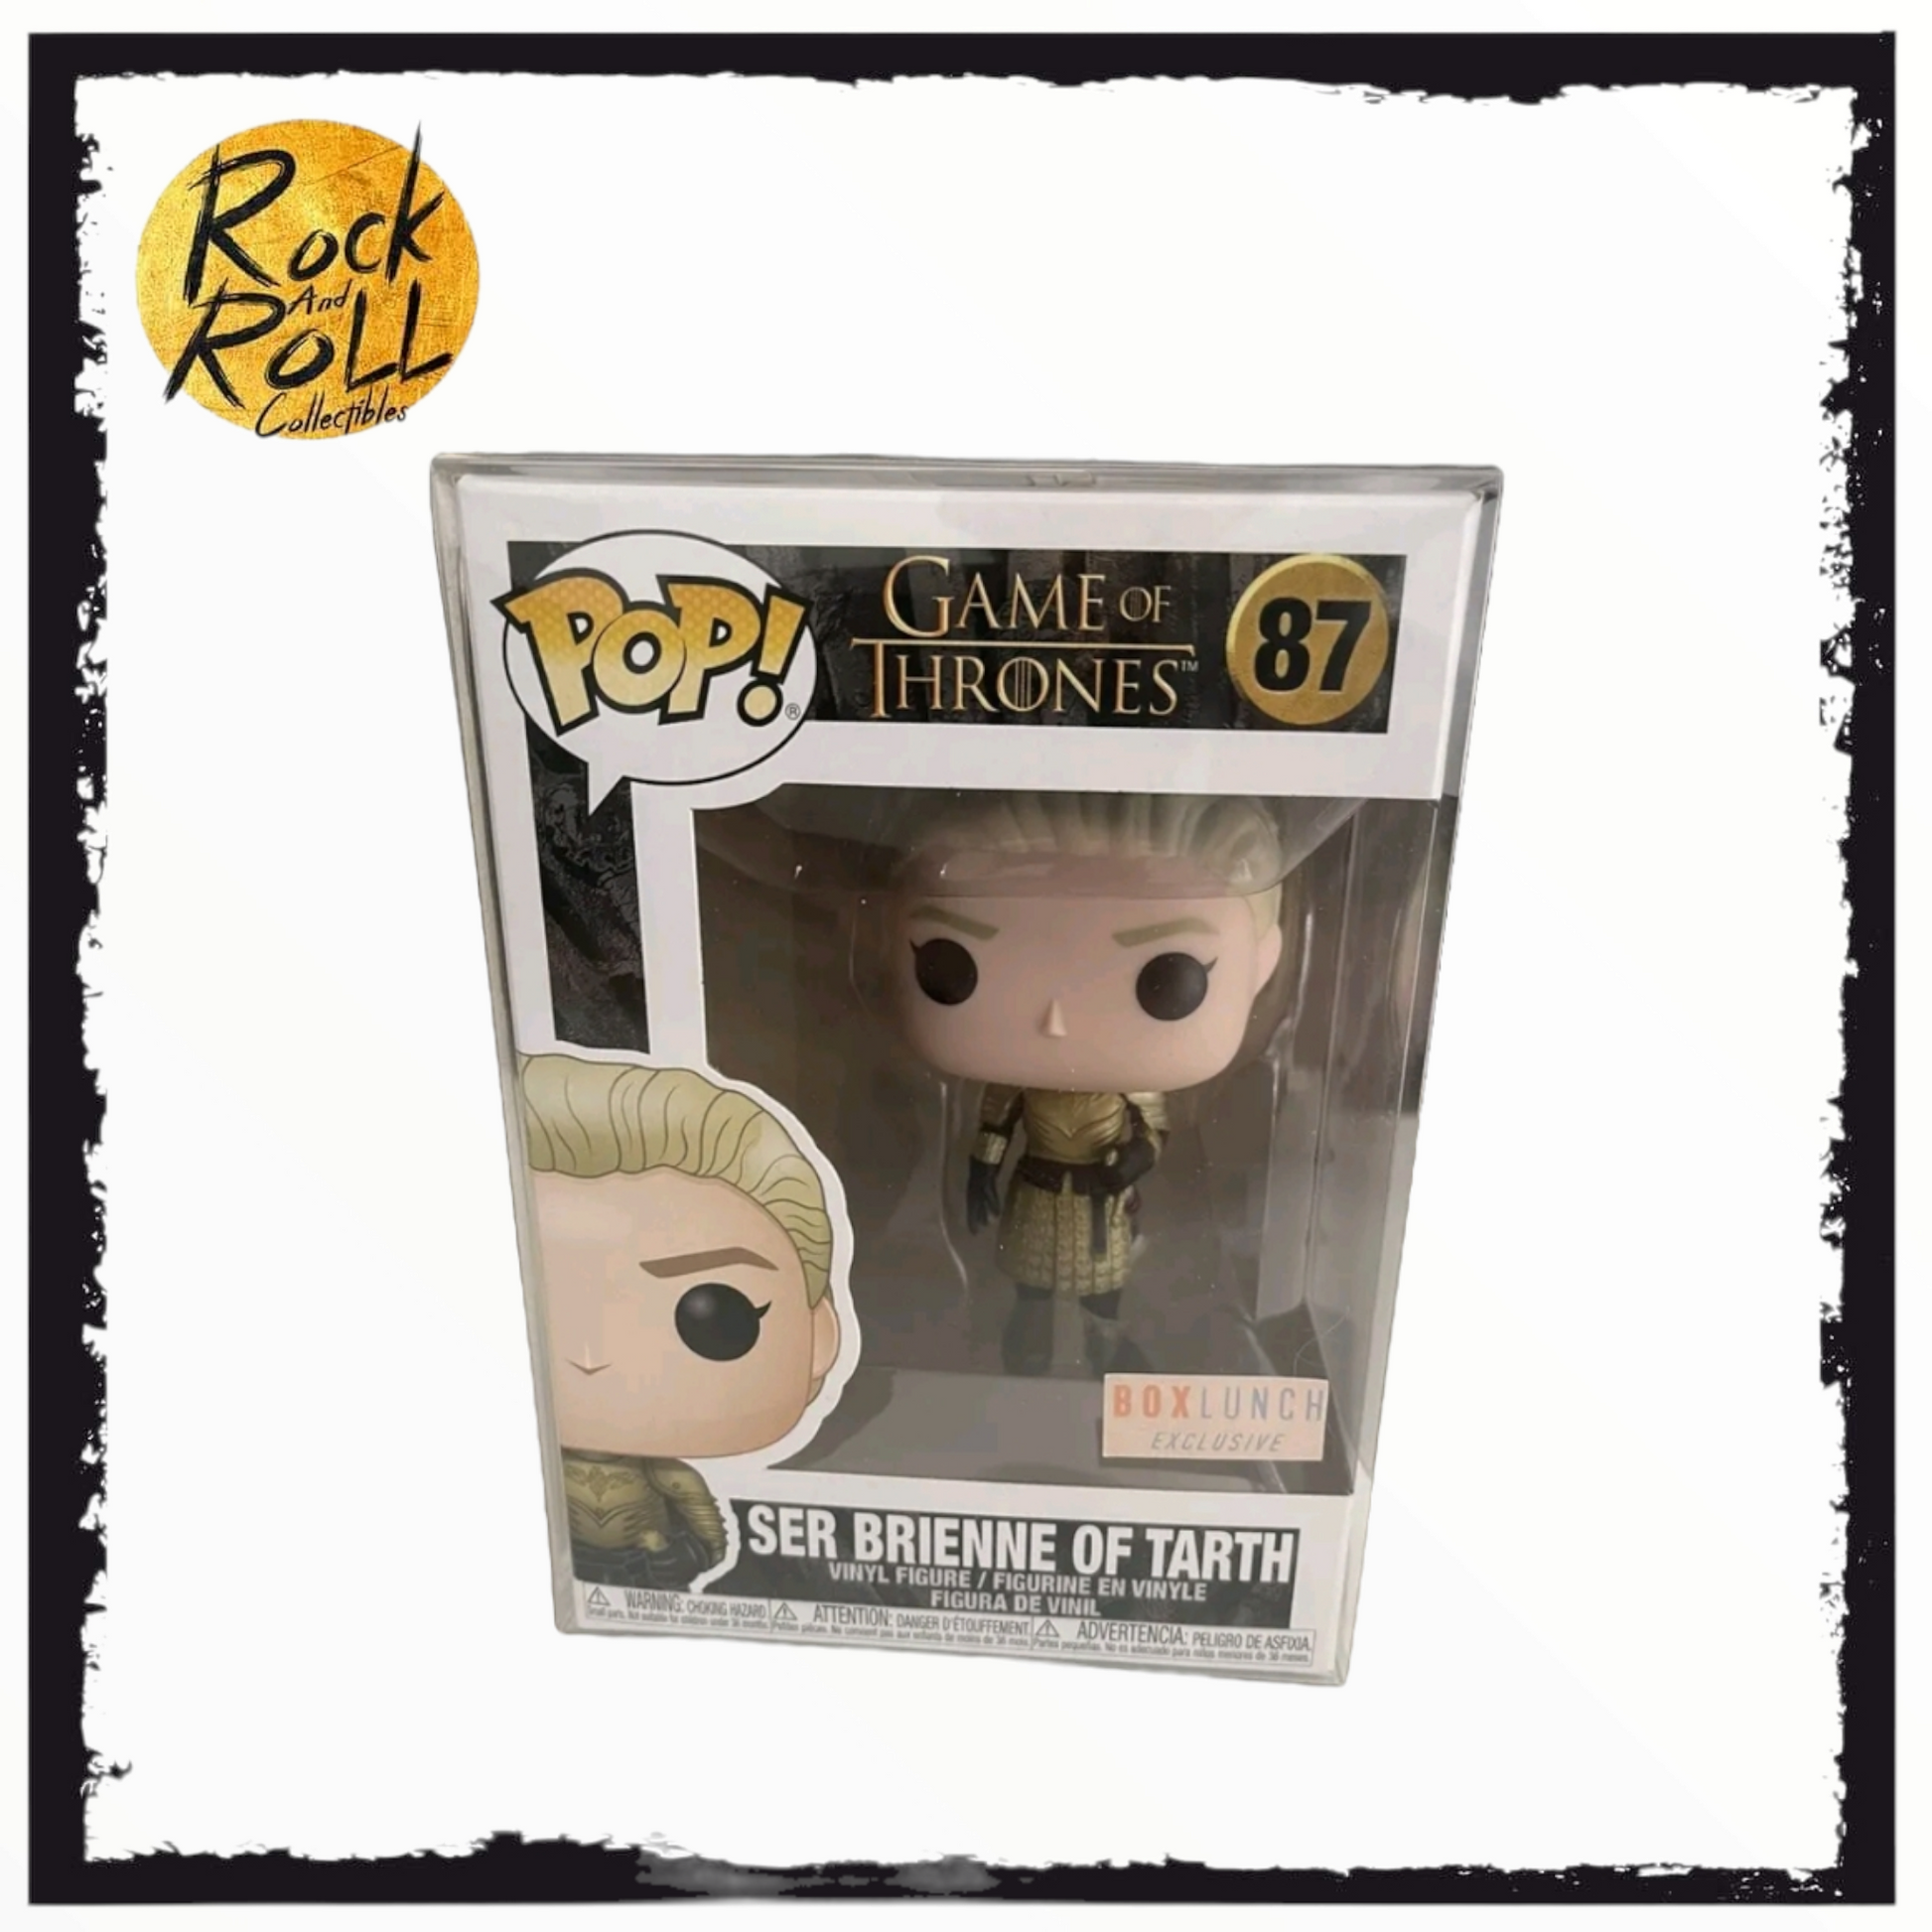 crack Messing Klemme Game of Thrones - Ser Brienne Of Tarth Funko Pop! #87 Box Lunch Exclus –  rock and roll collectibles